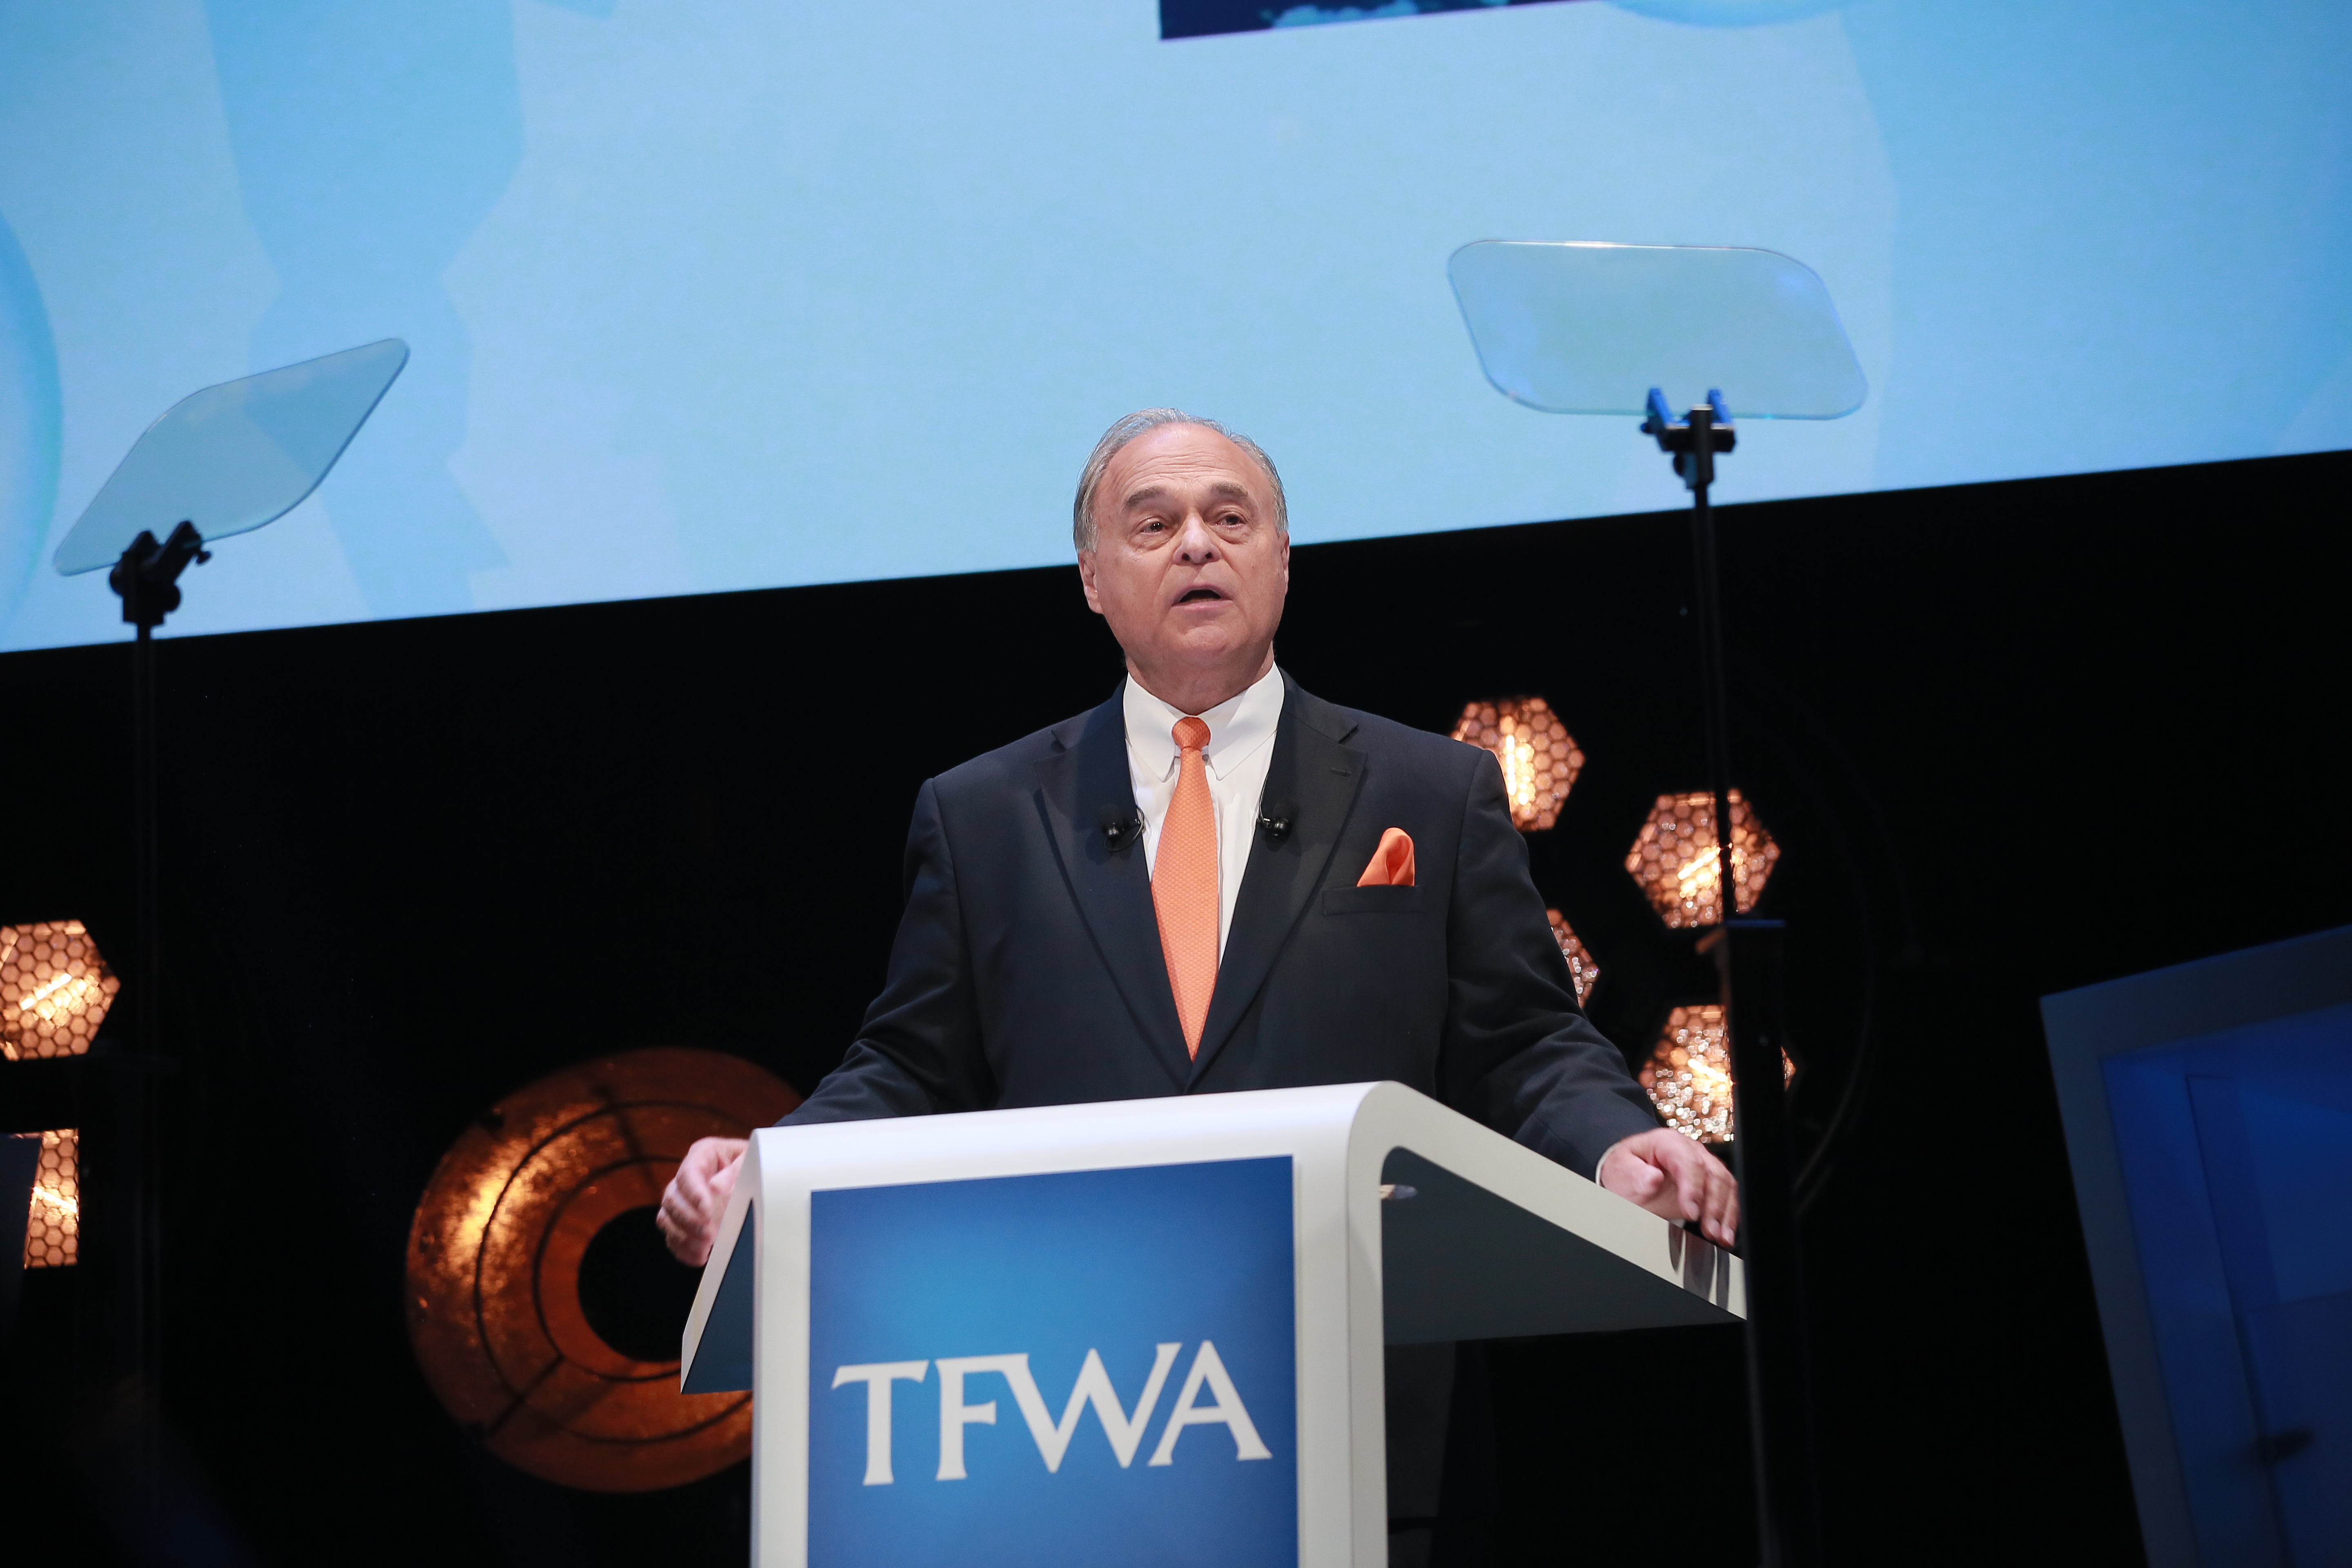 TFWA blog: Ask not what your industry can do for you